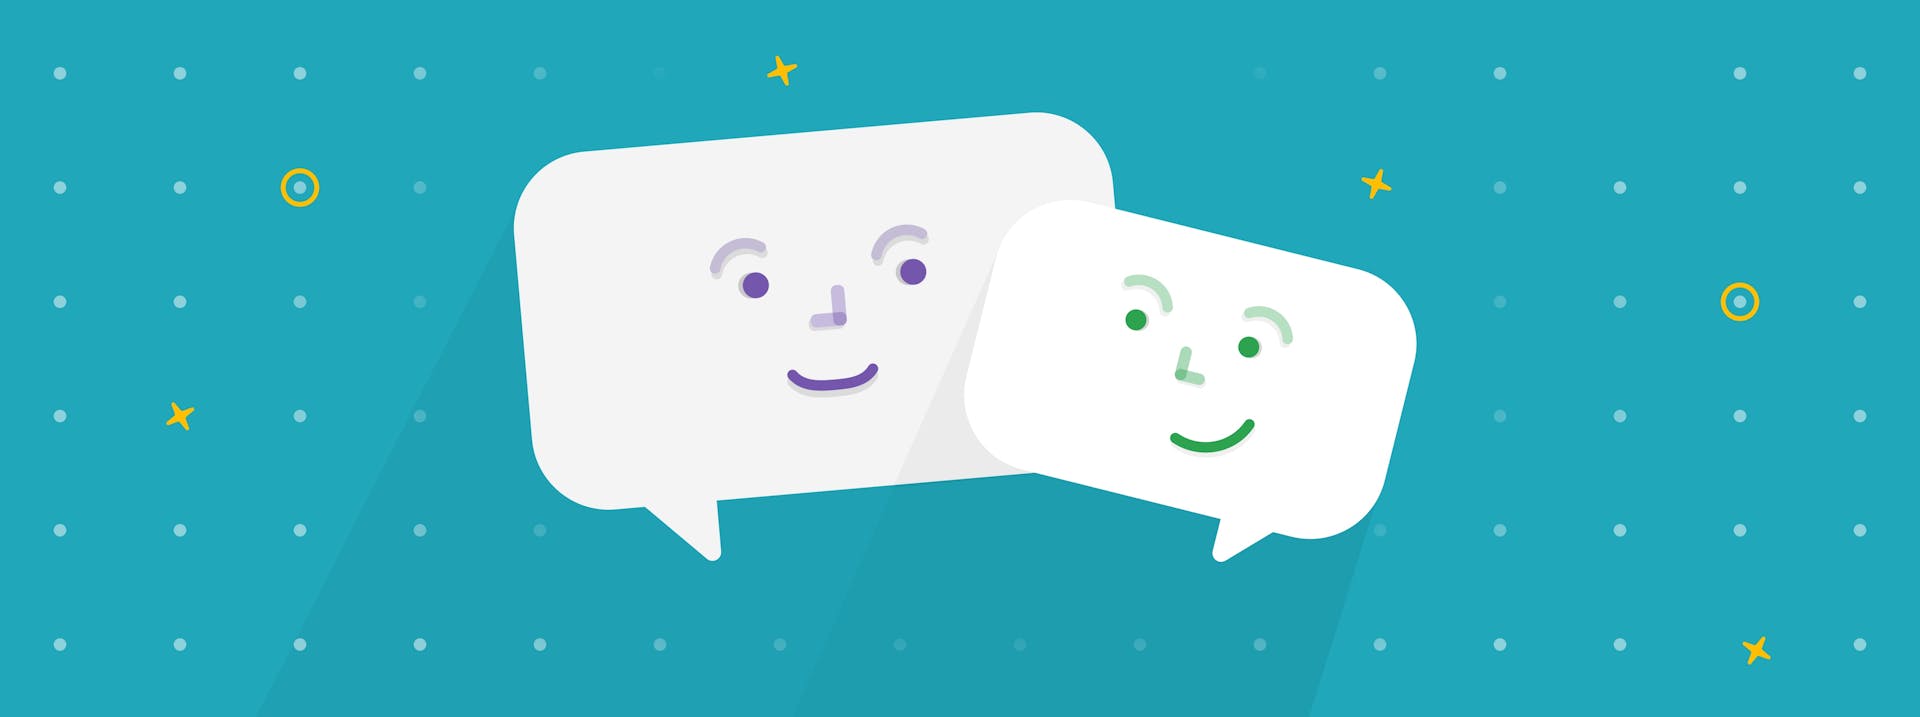 Illustration of two speech bubbles smiling at each other